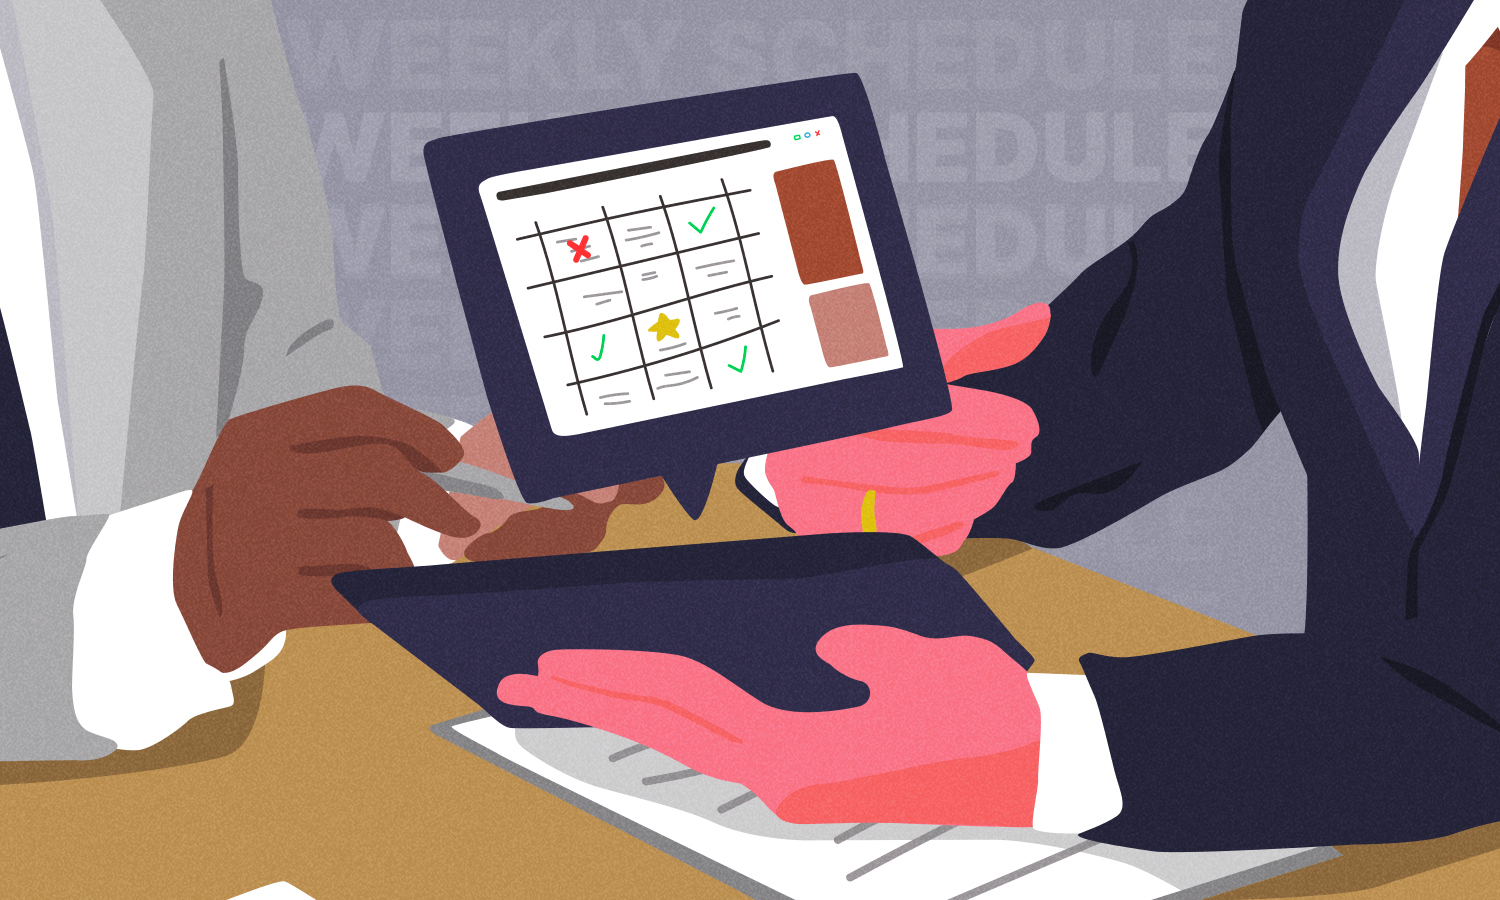 How You and Your Assistant Can Design Your Ideal Week